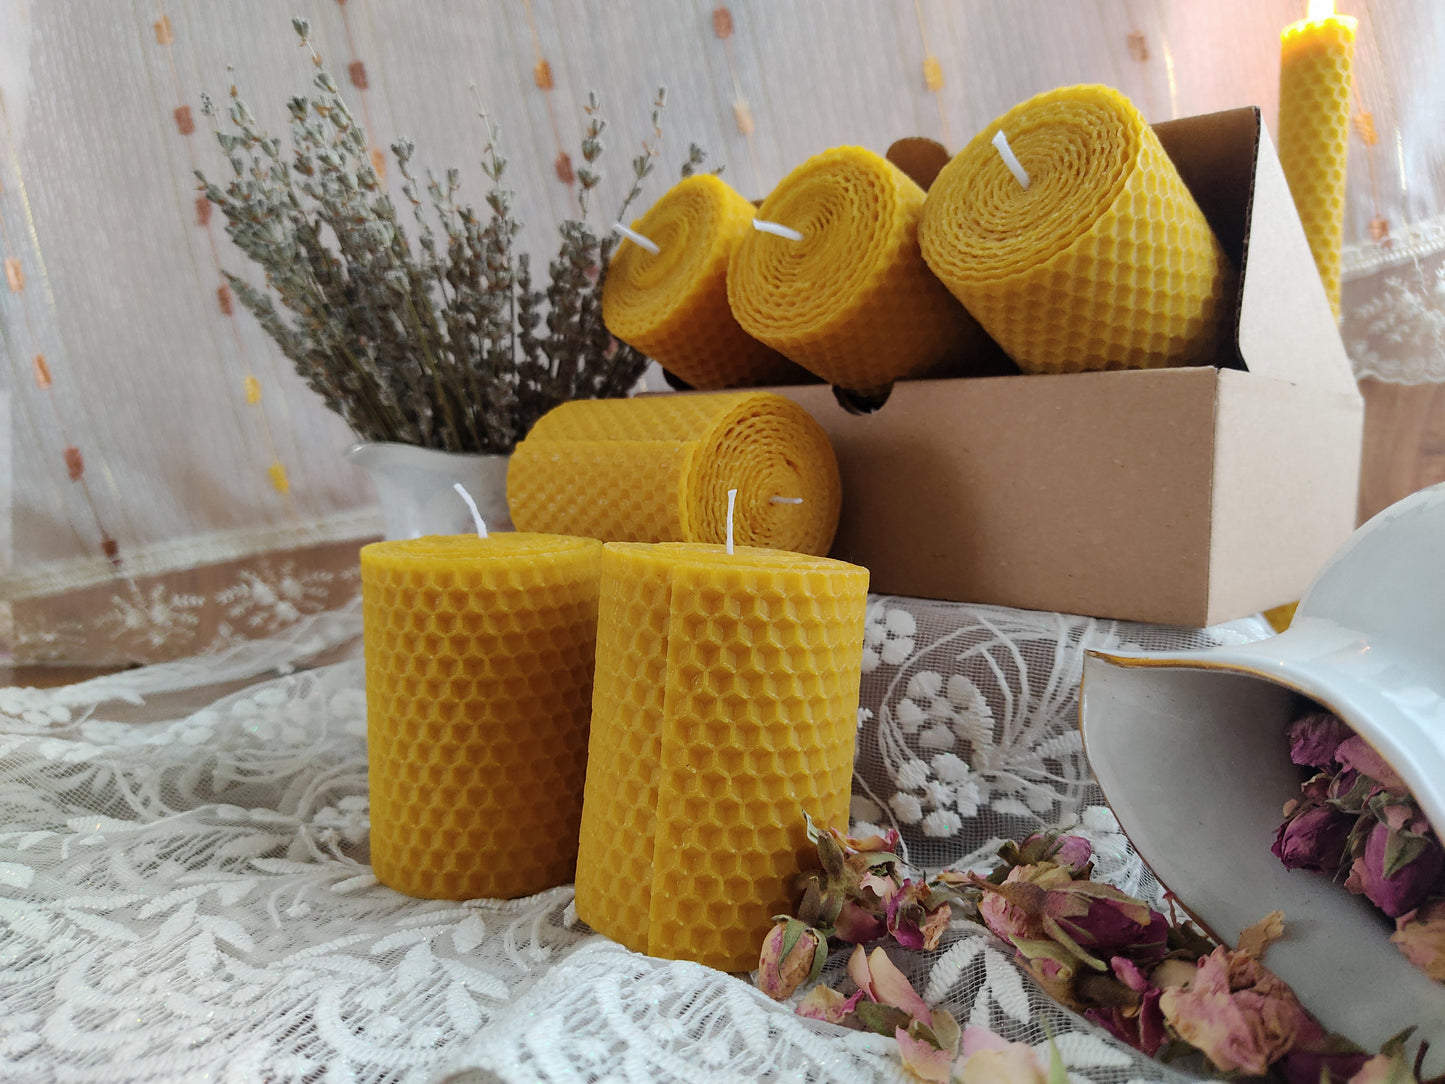 Wholesale Handmade Candles 7x6 cm Honeycomb Beeswax Candles,